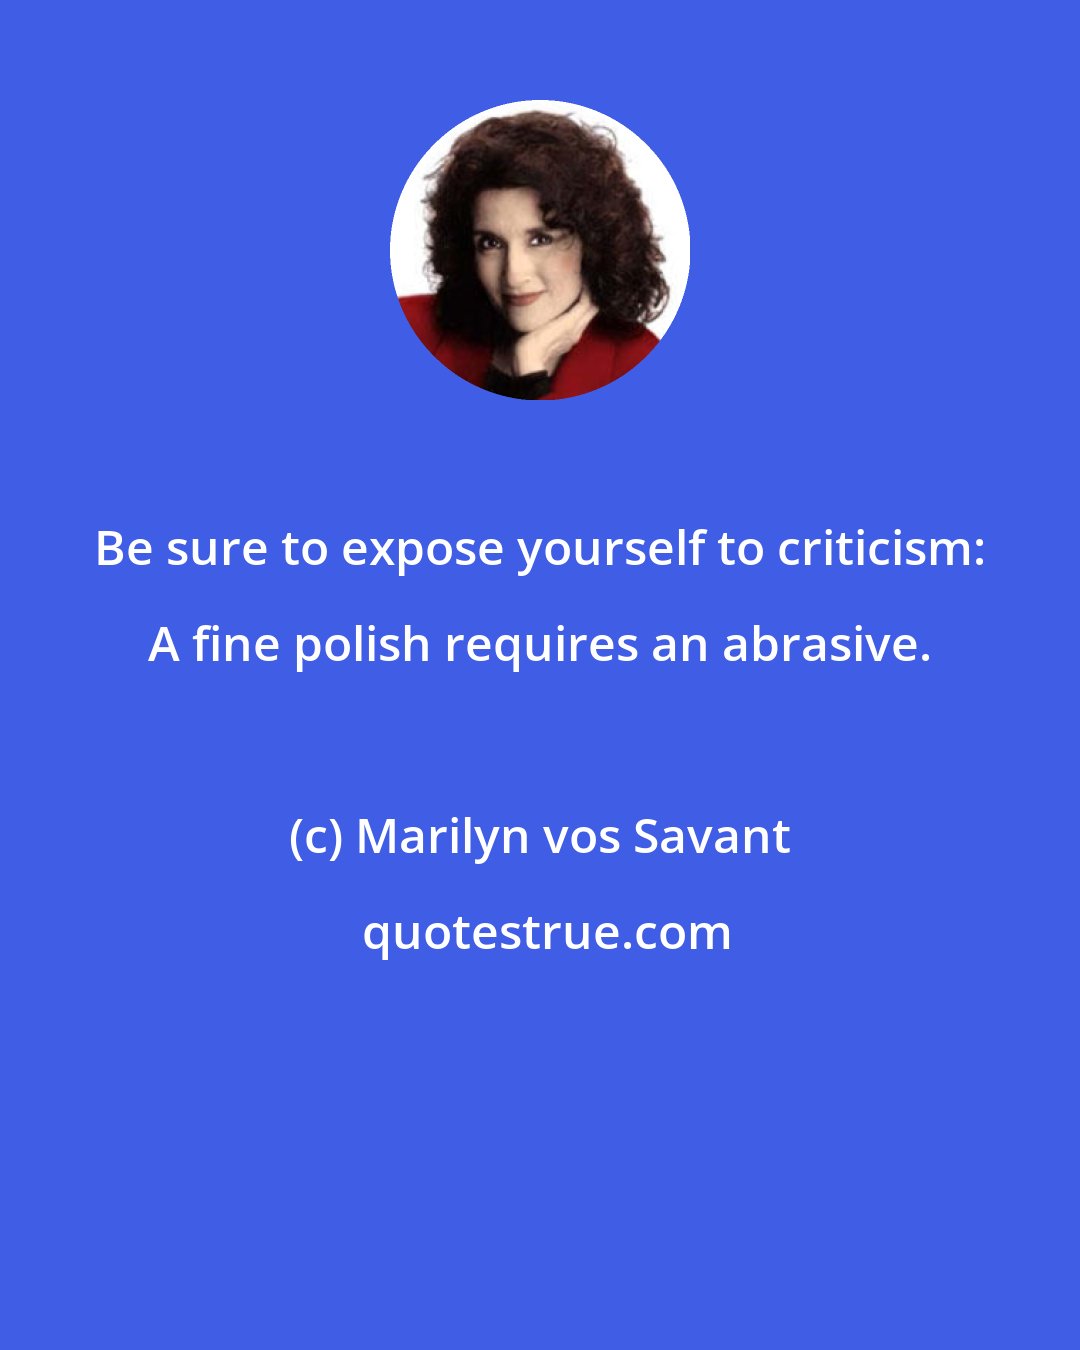 Marilyn vos Savant: Be sure to expose yourself to criticism: A fine polish requires an abrasive.